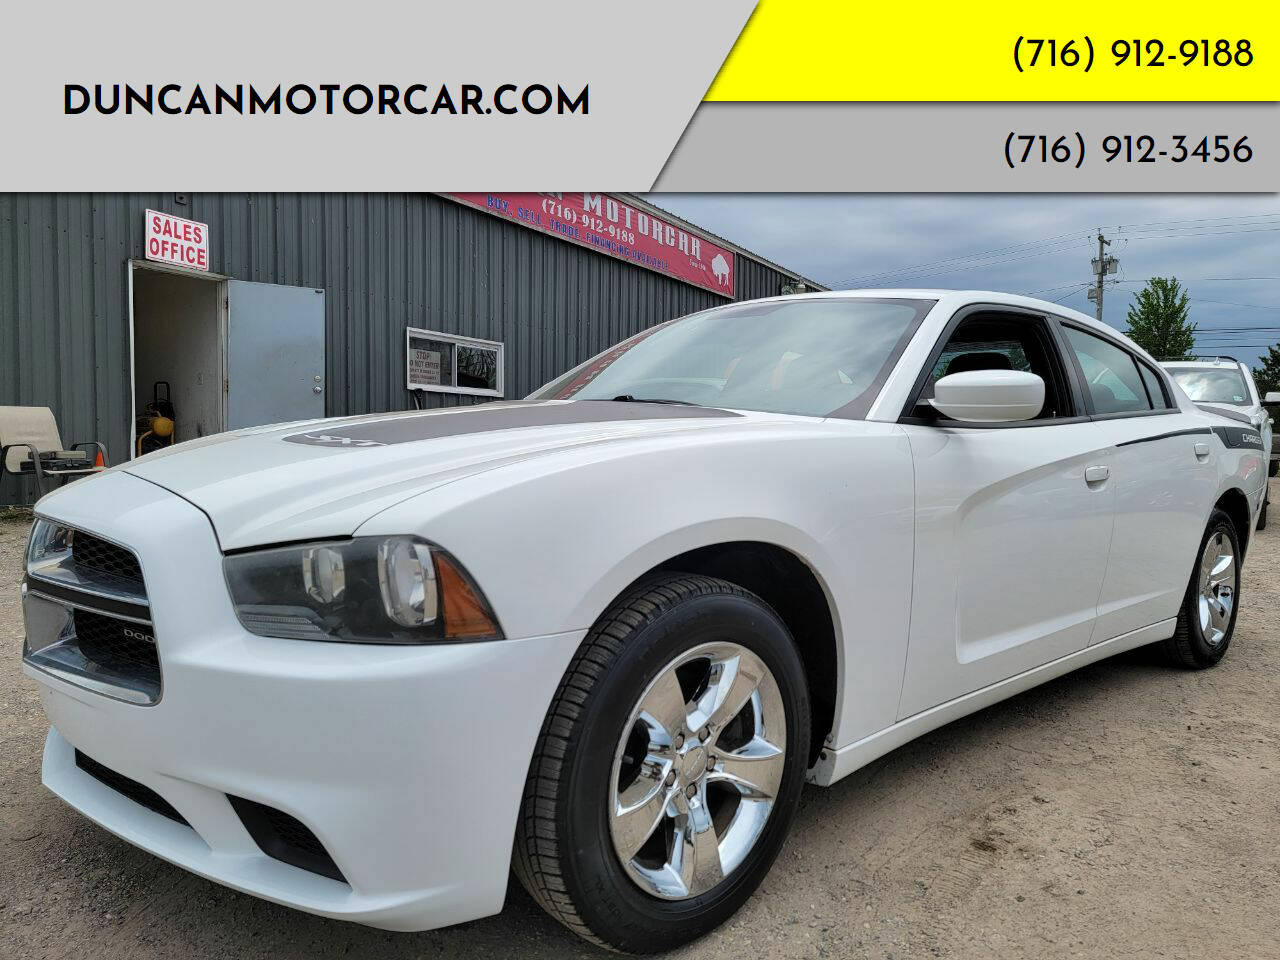 Dodge Charger For Sale In Buffalo, NY ®